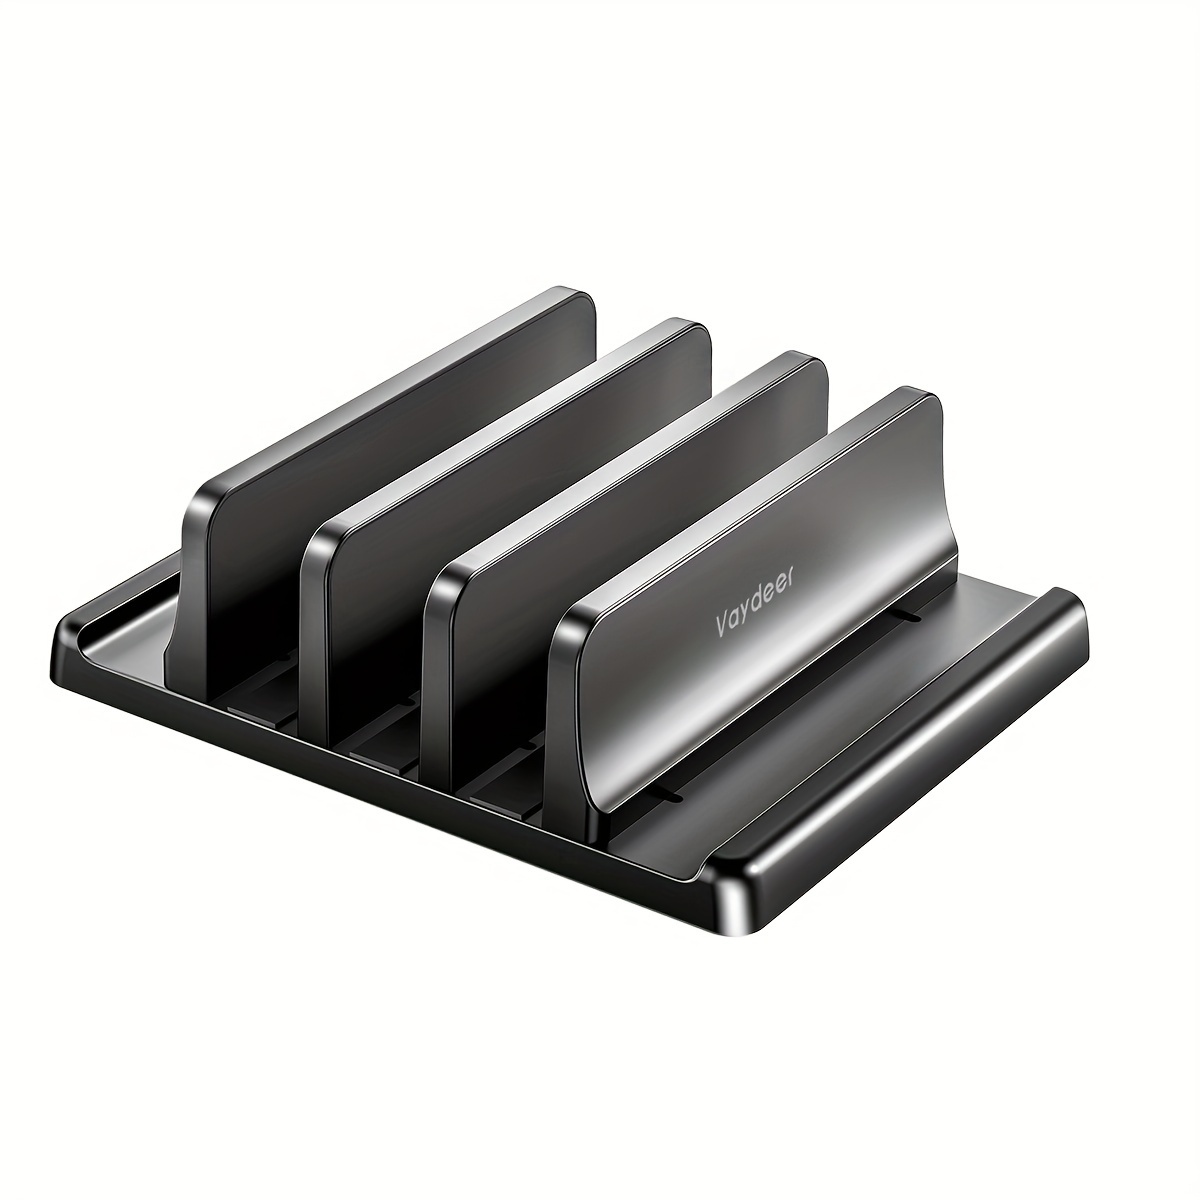 

3-slot Vertical Laptop Stand Made Of Premium Abs Plastics 5 In 1 -saving Adjustable Desk Organizer For All /chromebook/surface